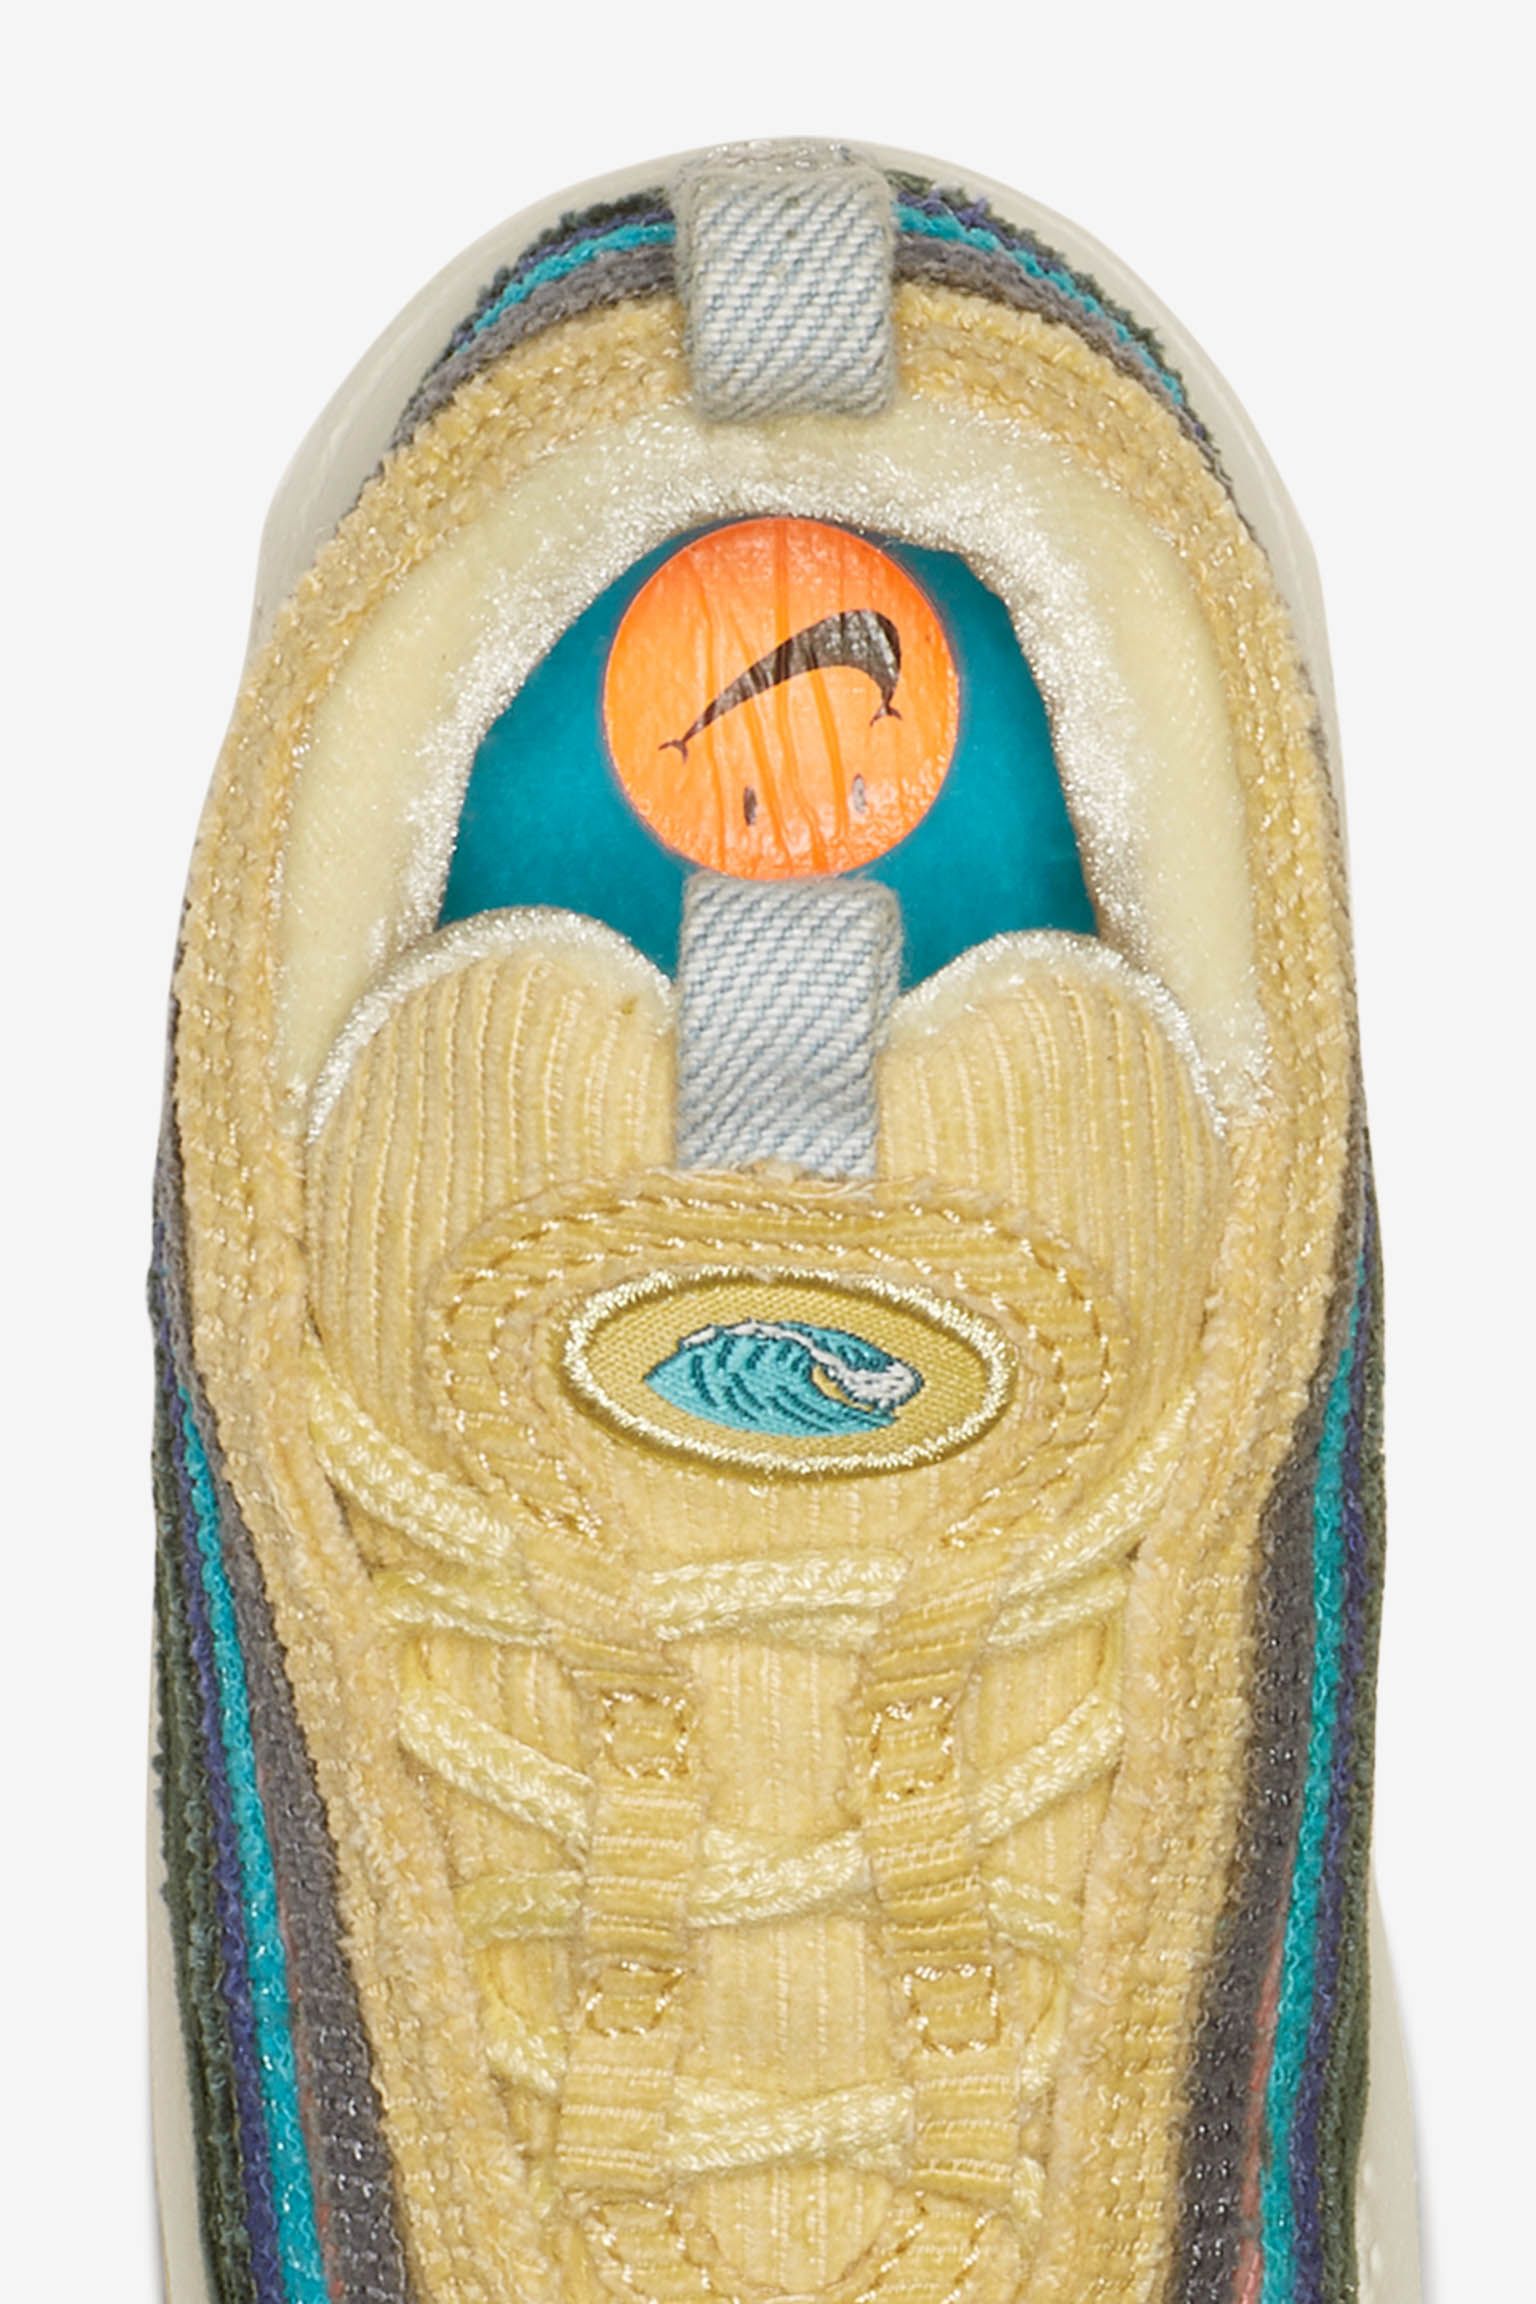 Nike Air Max 1/97 SW TD 'Sean Wotherspoon' Release Date. Nike SNKRS